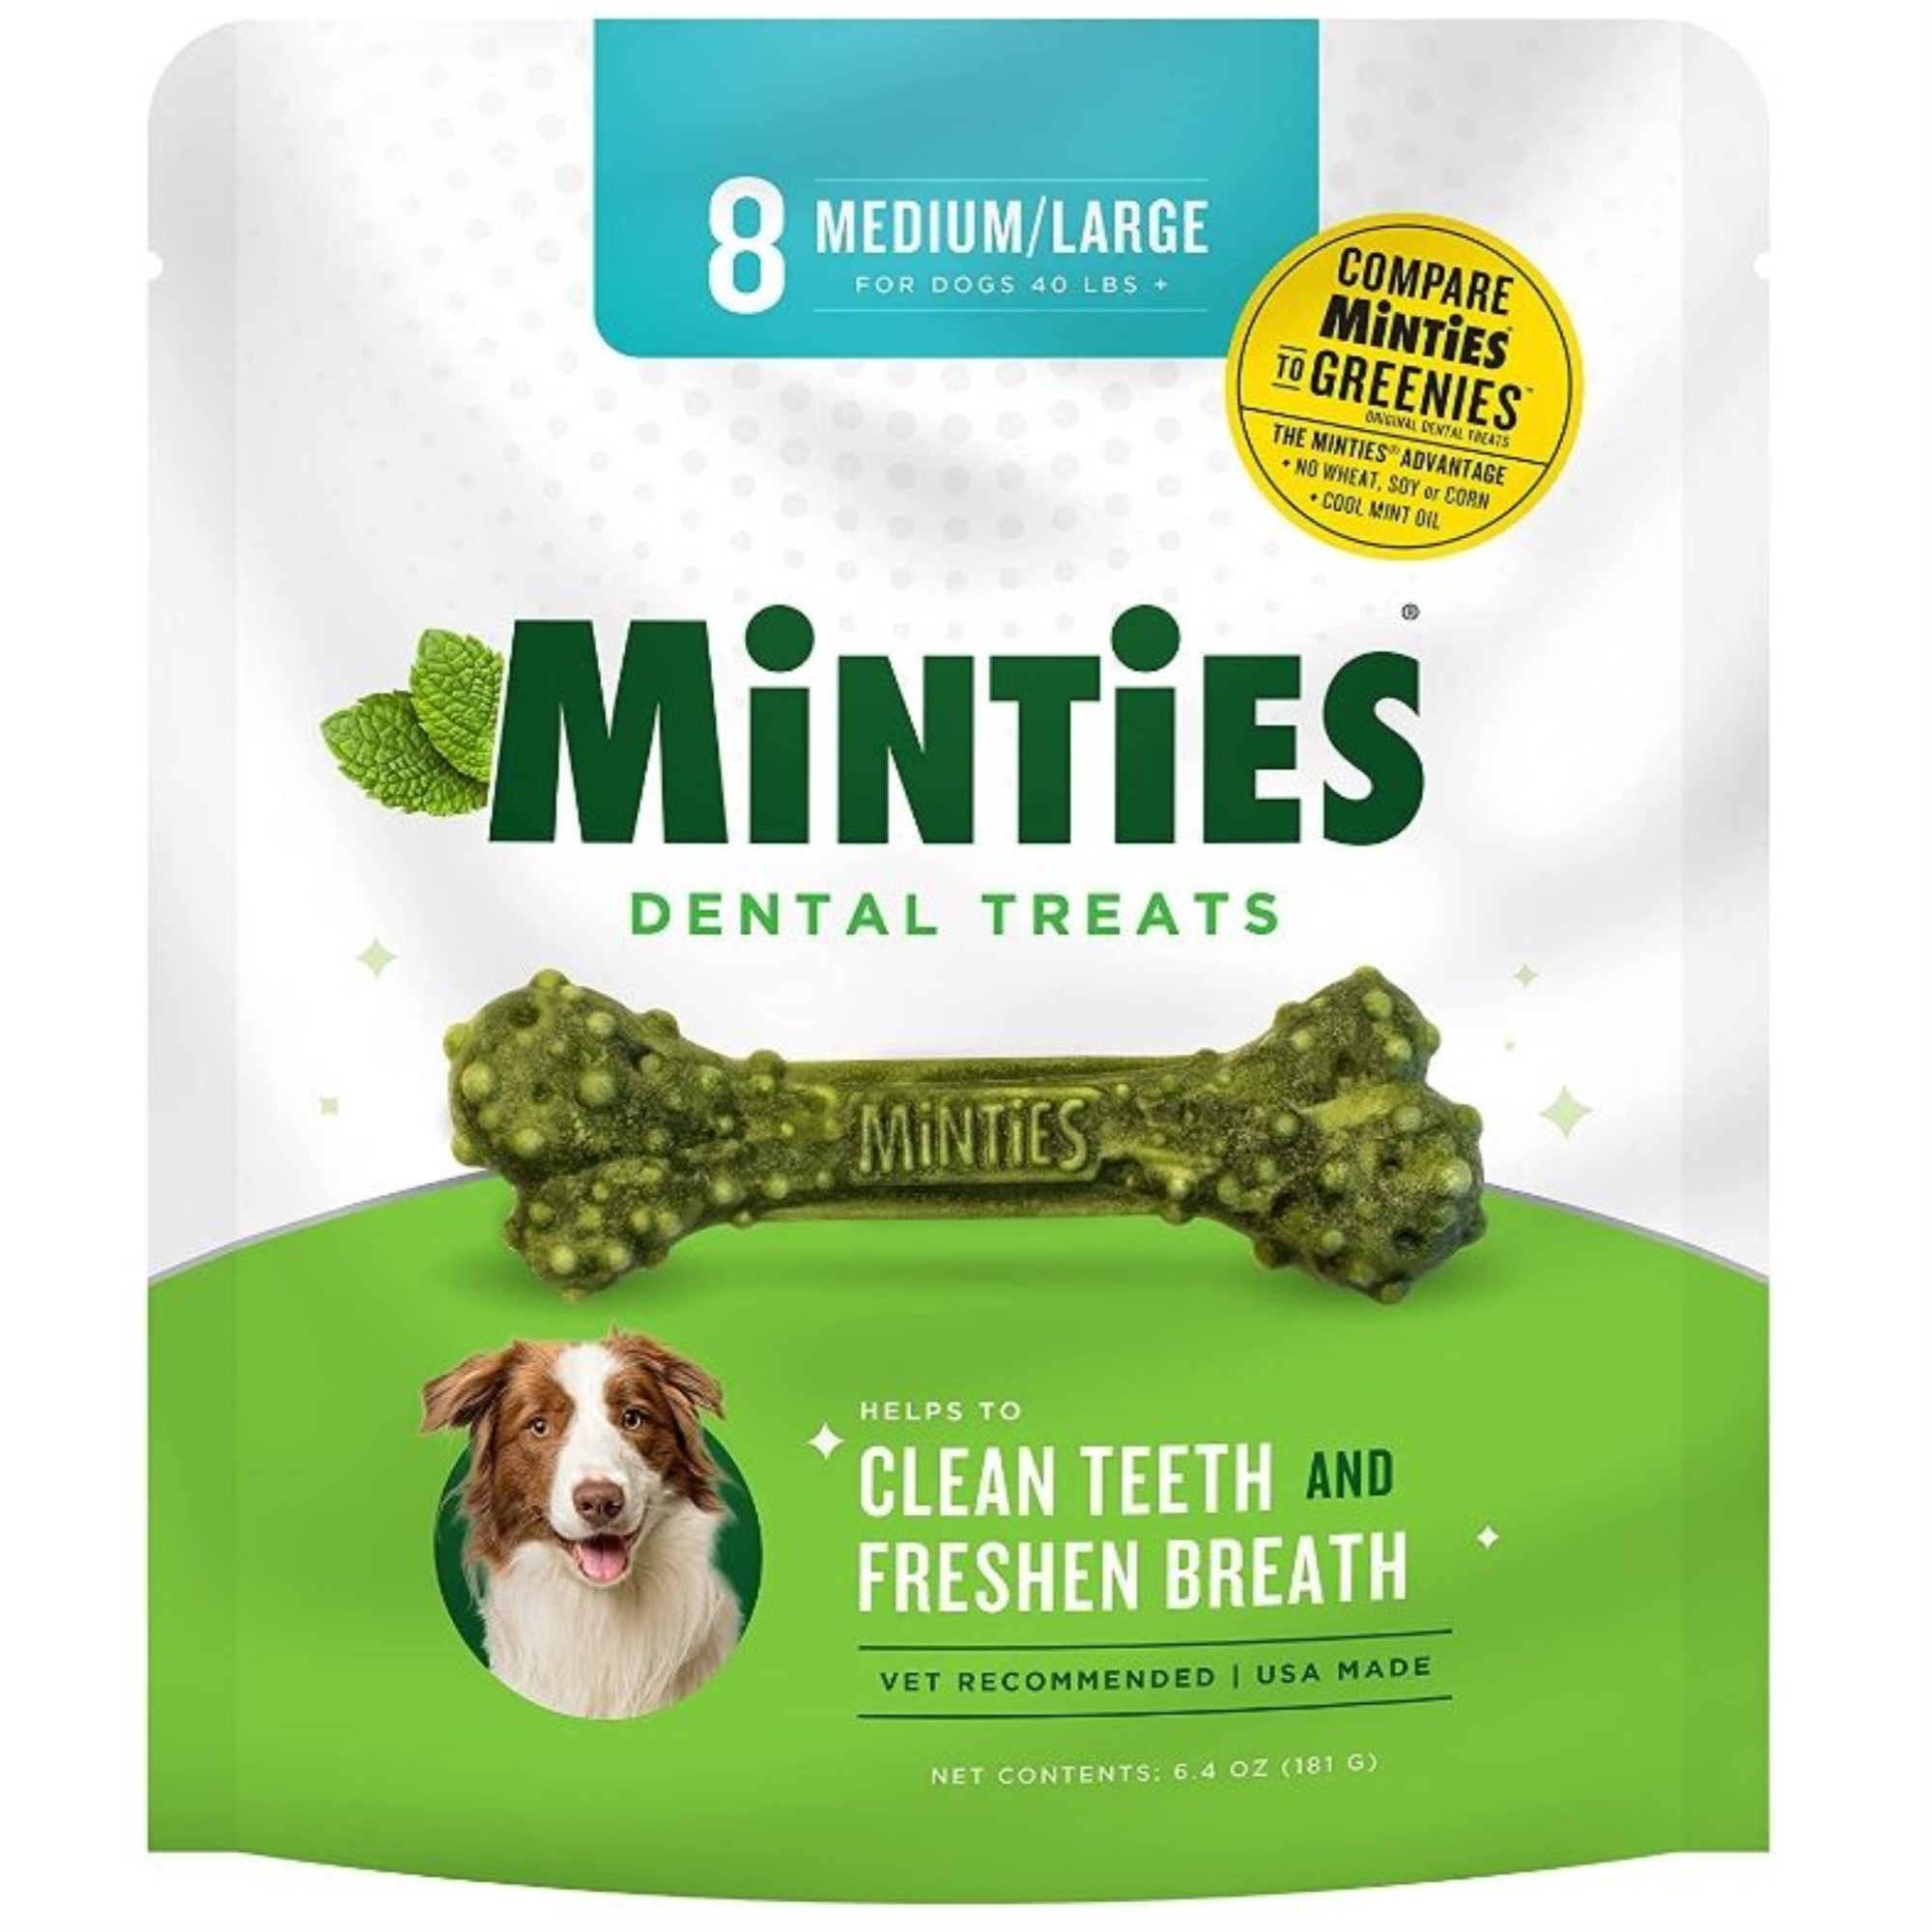 Sergeants Minties Dental Chews for Dogs, Vet-Recommended Mint-Flavored Dental Treats for Medium/Large Dogs over 40 lbs, Dental Bones Clean